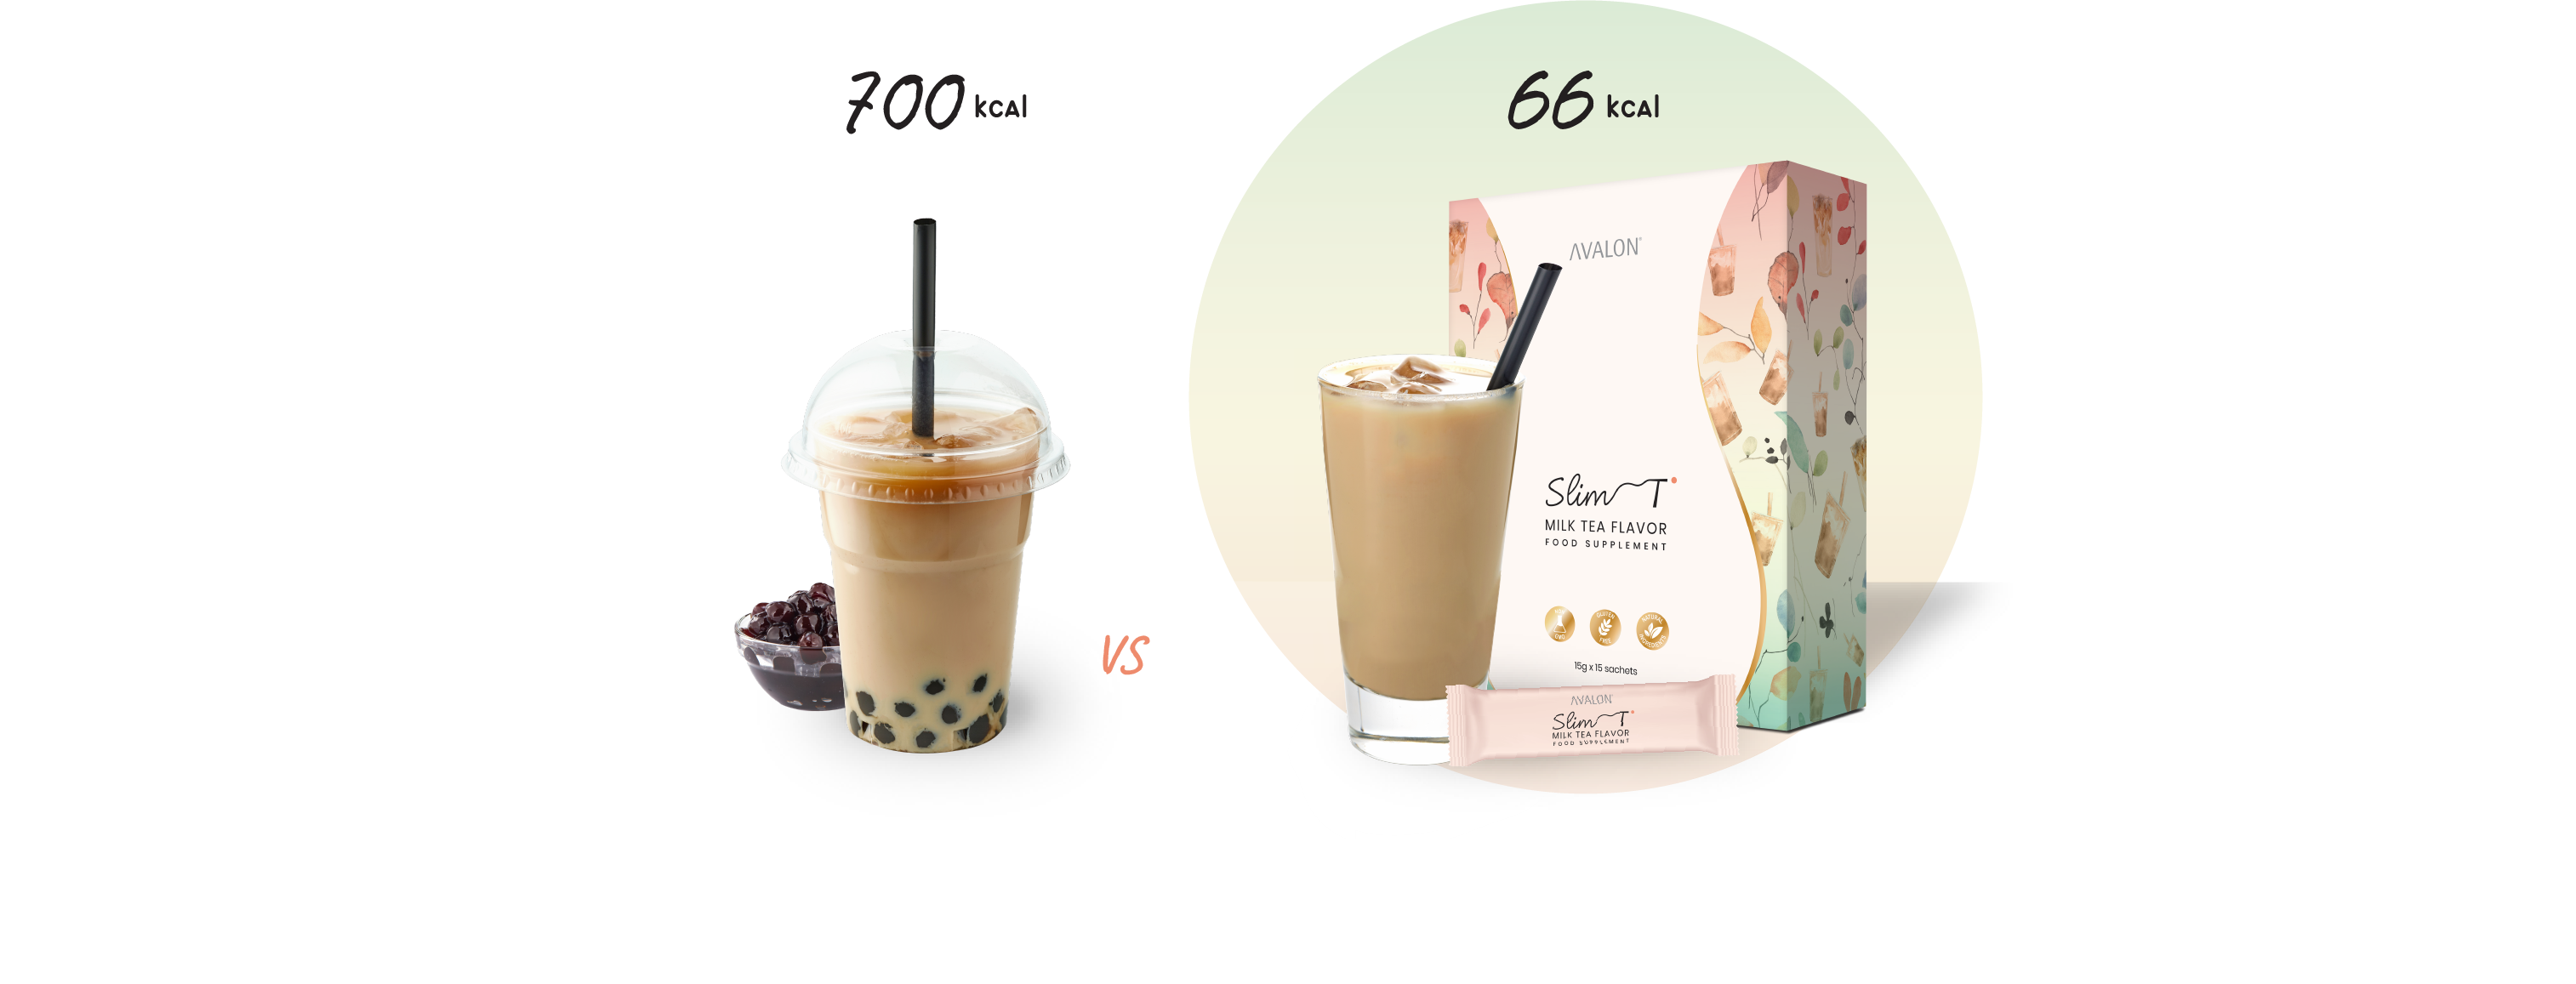 Enjoy deliciously guilt-free milk tea while maintaining a healthy weight and preventing blood sugar spikes. AVALON® Slim T is made with White Kidney Bean Extract (Phase II Carb Controller), African Wild Mango Seed Extract (Fat Blocker), L-arabinose (Sugar Blocker), Vitamin B Complex, Folic Acid and Biotin. Slimming, boosts metabolism, weight management, maintains healthy blood sugar levels, blocks carbs and fat absorption, promotes partial satiety. Formulated for daily use, our functional beverage is low in calories and skin-friendly, whilst satisfying your milk tea craving.